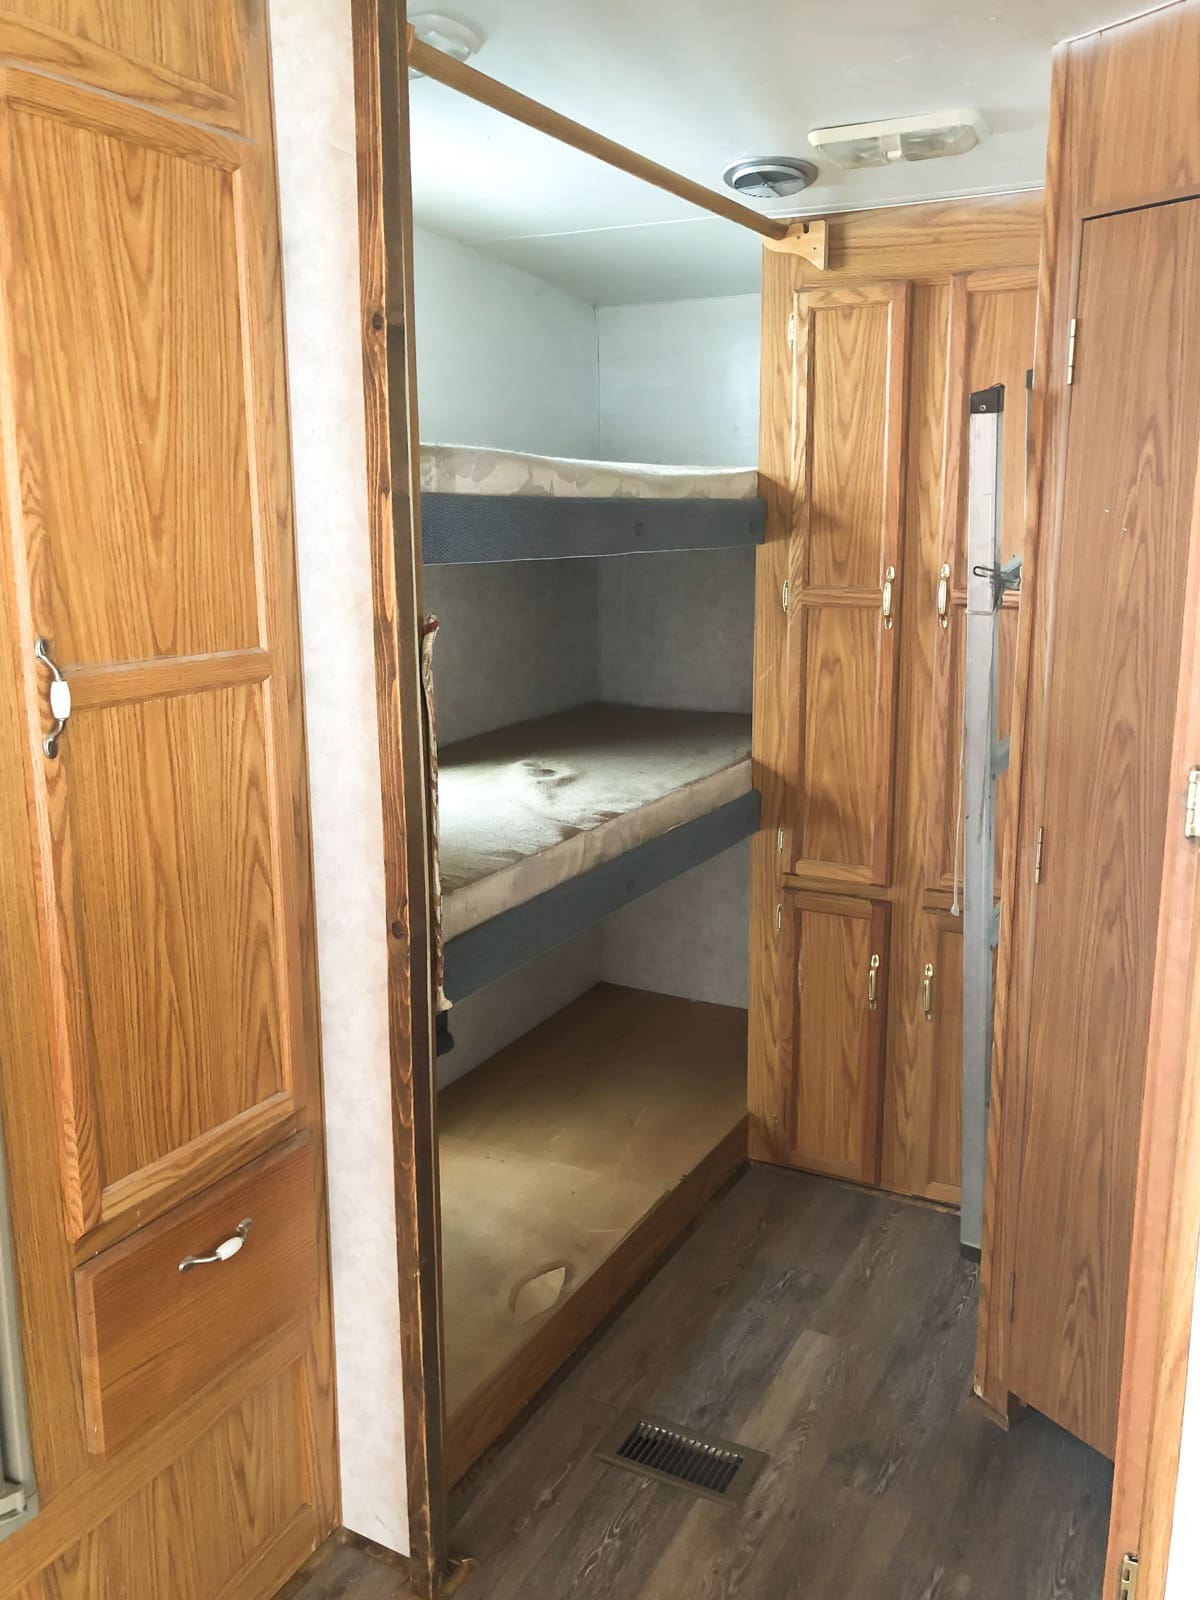 a look inside our RV camper trailer before makeover